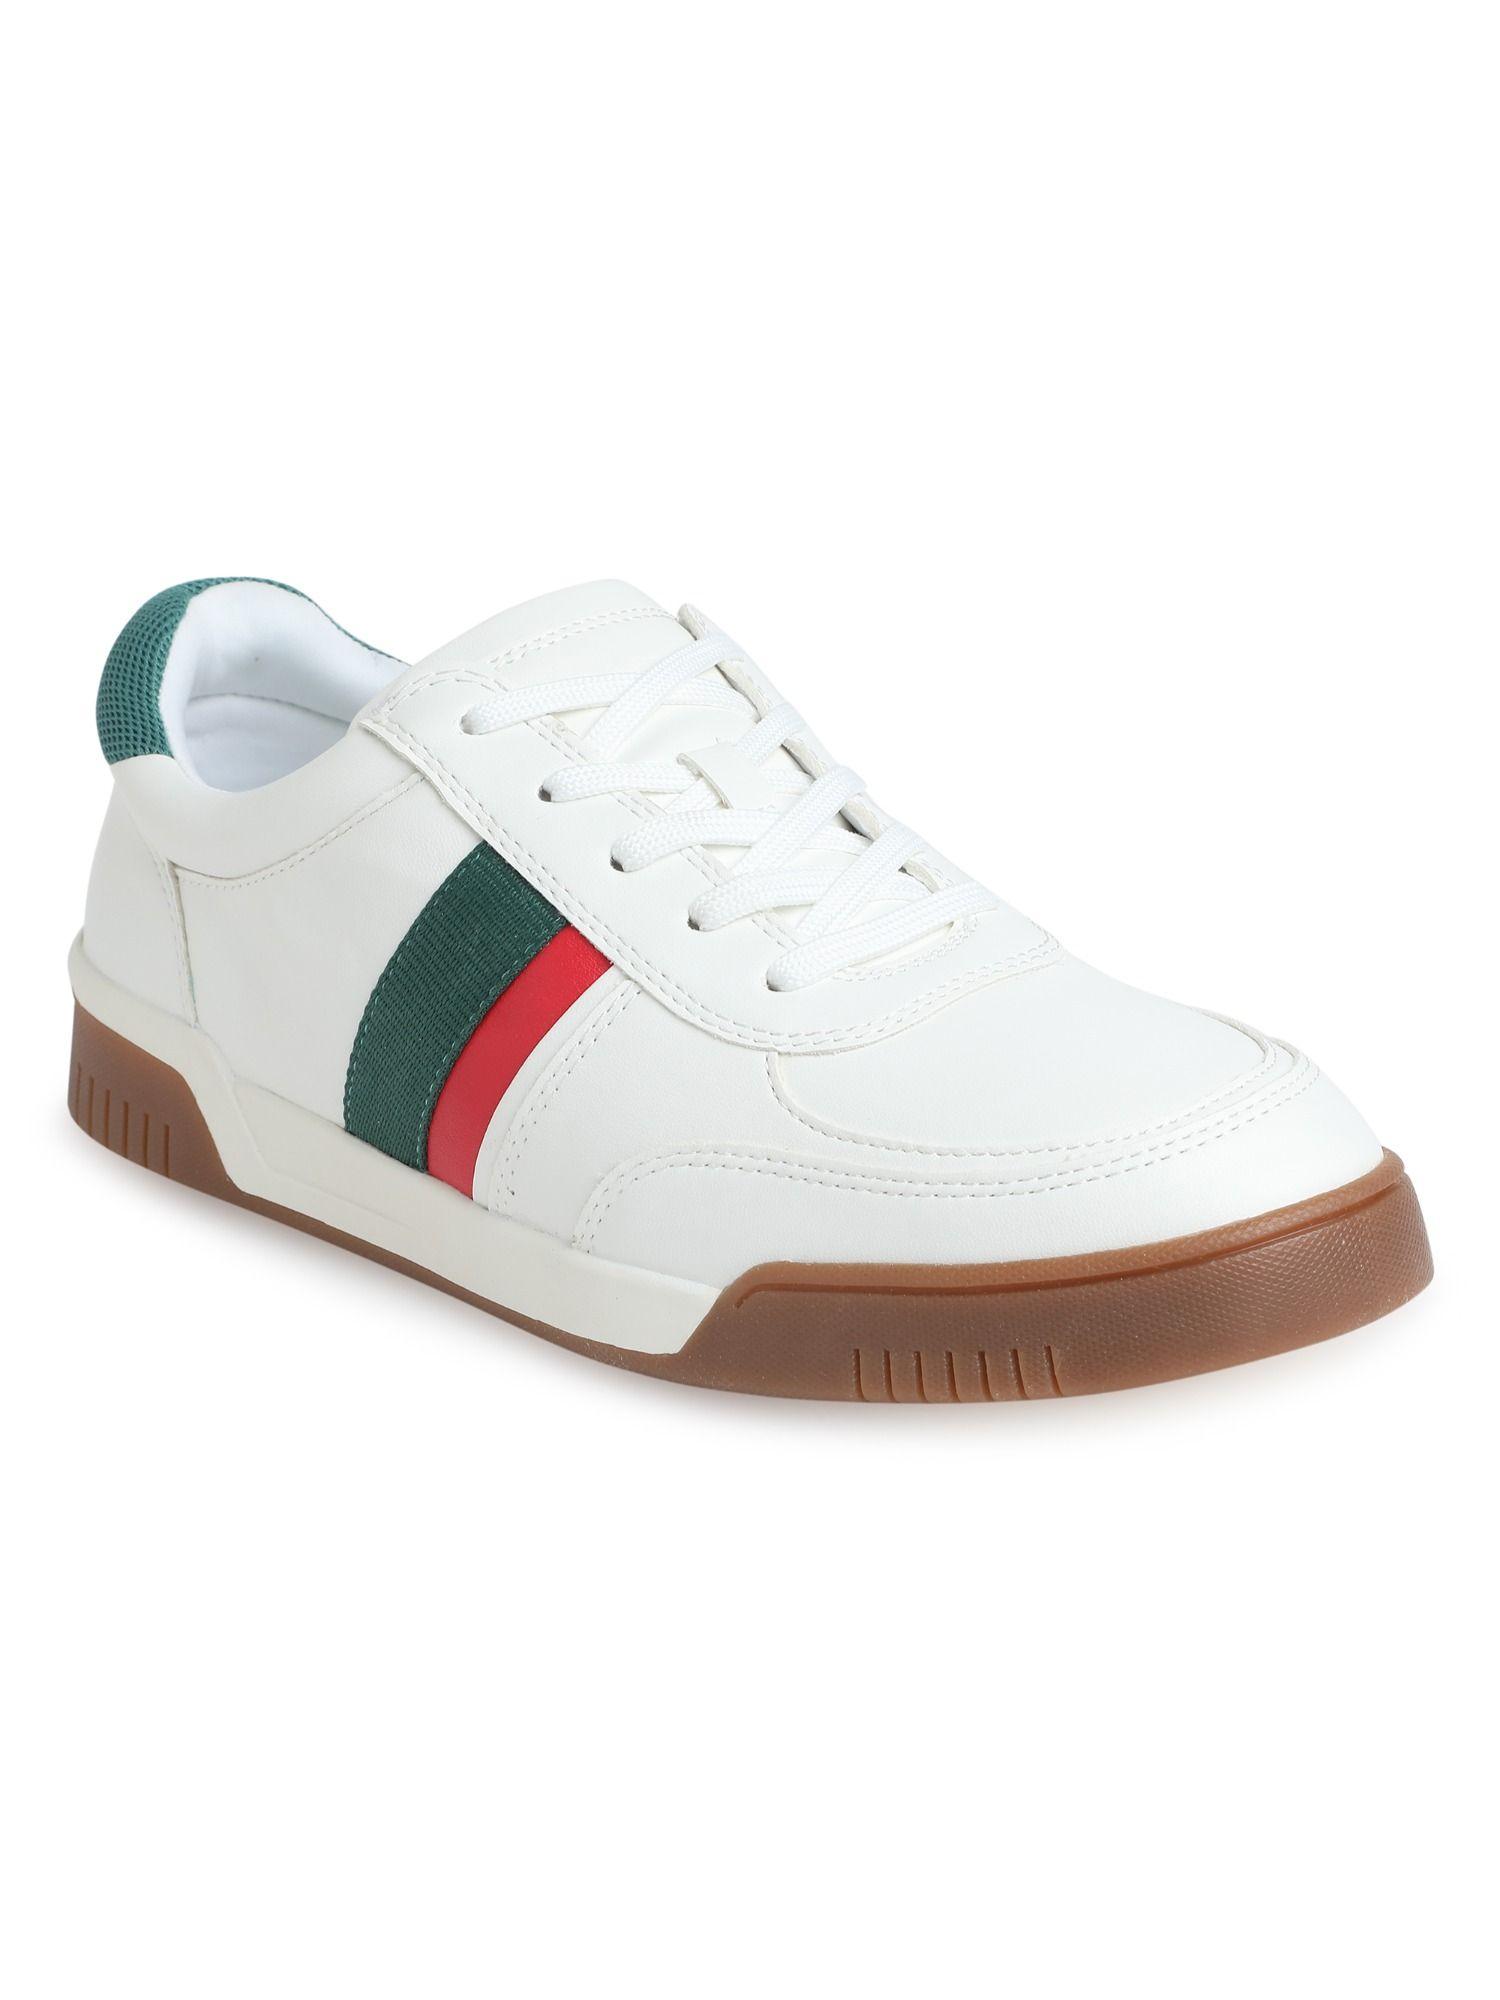 repolao synthetic white colorblock sneakers